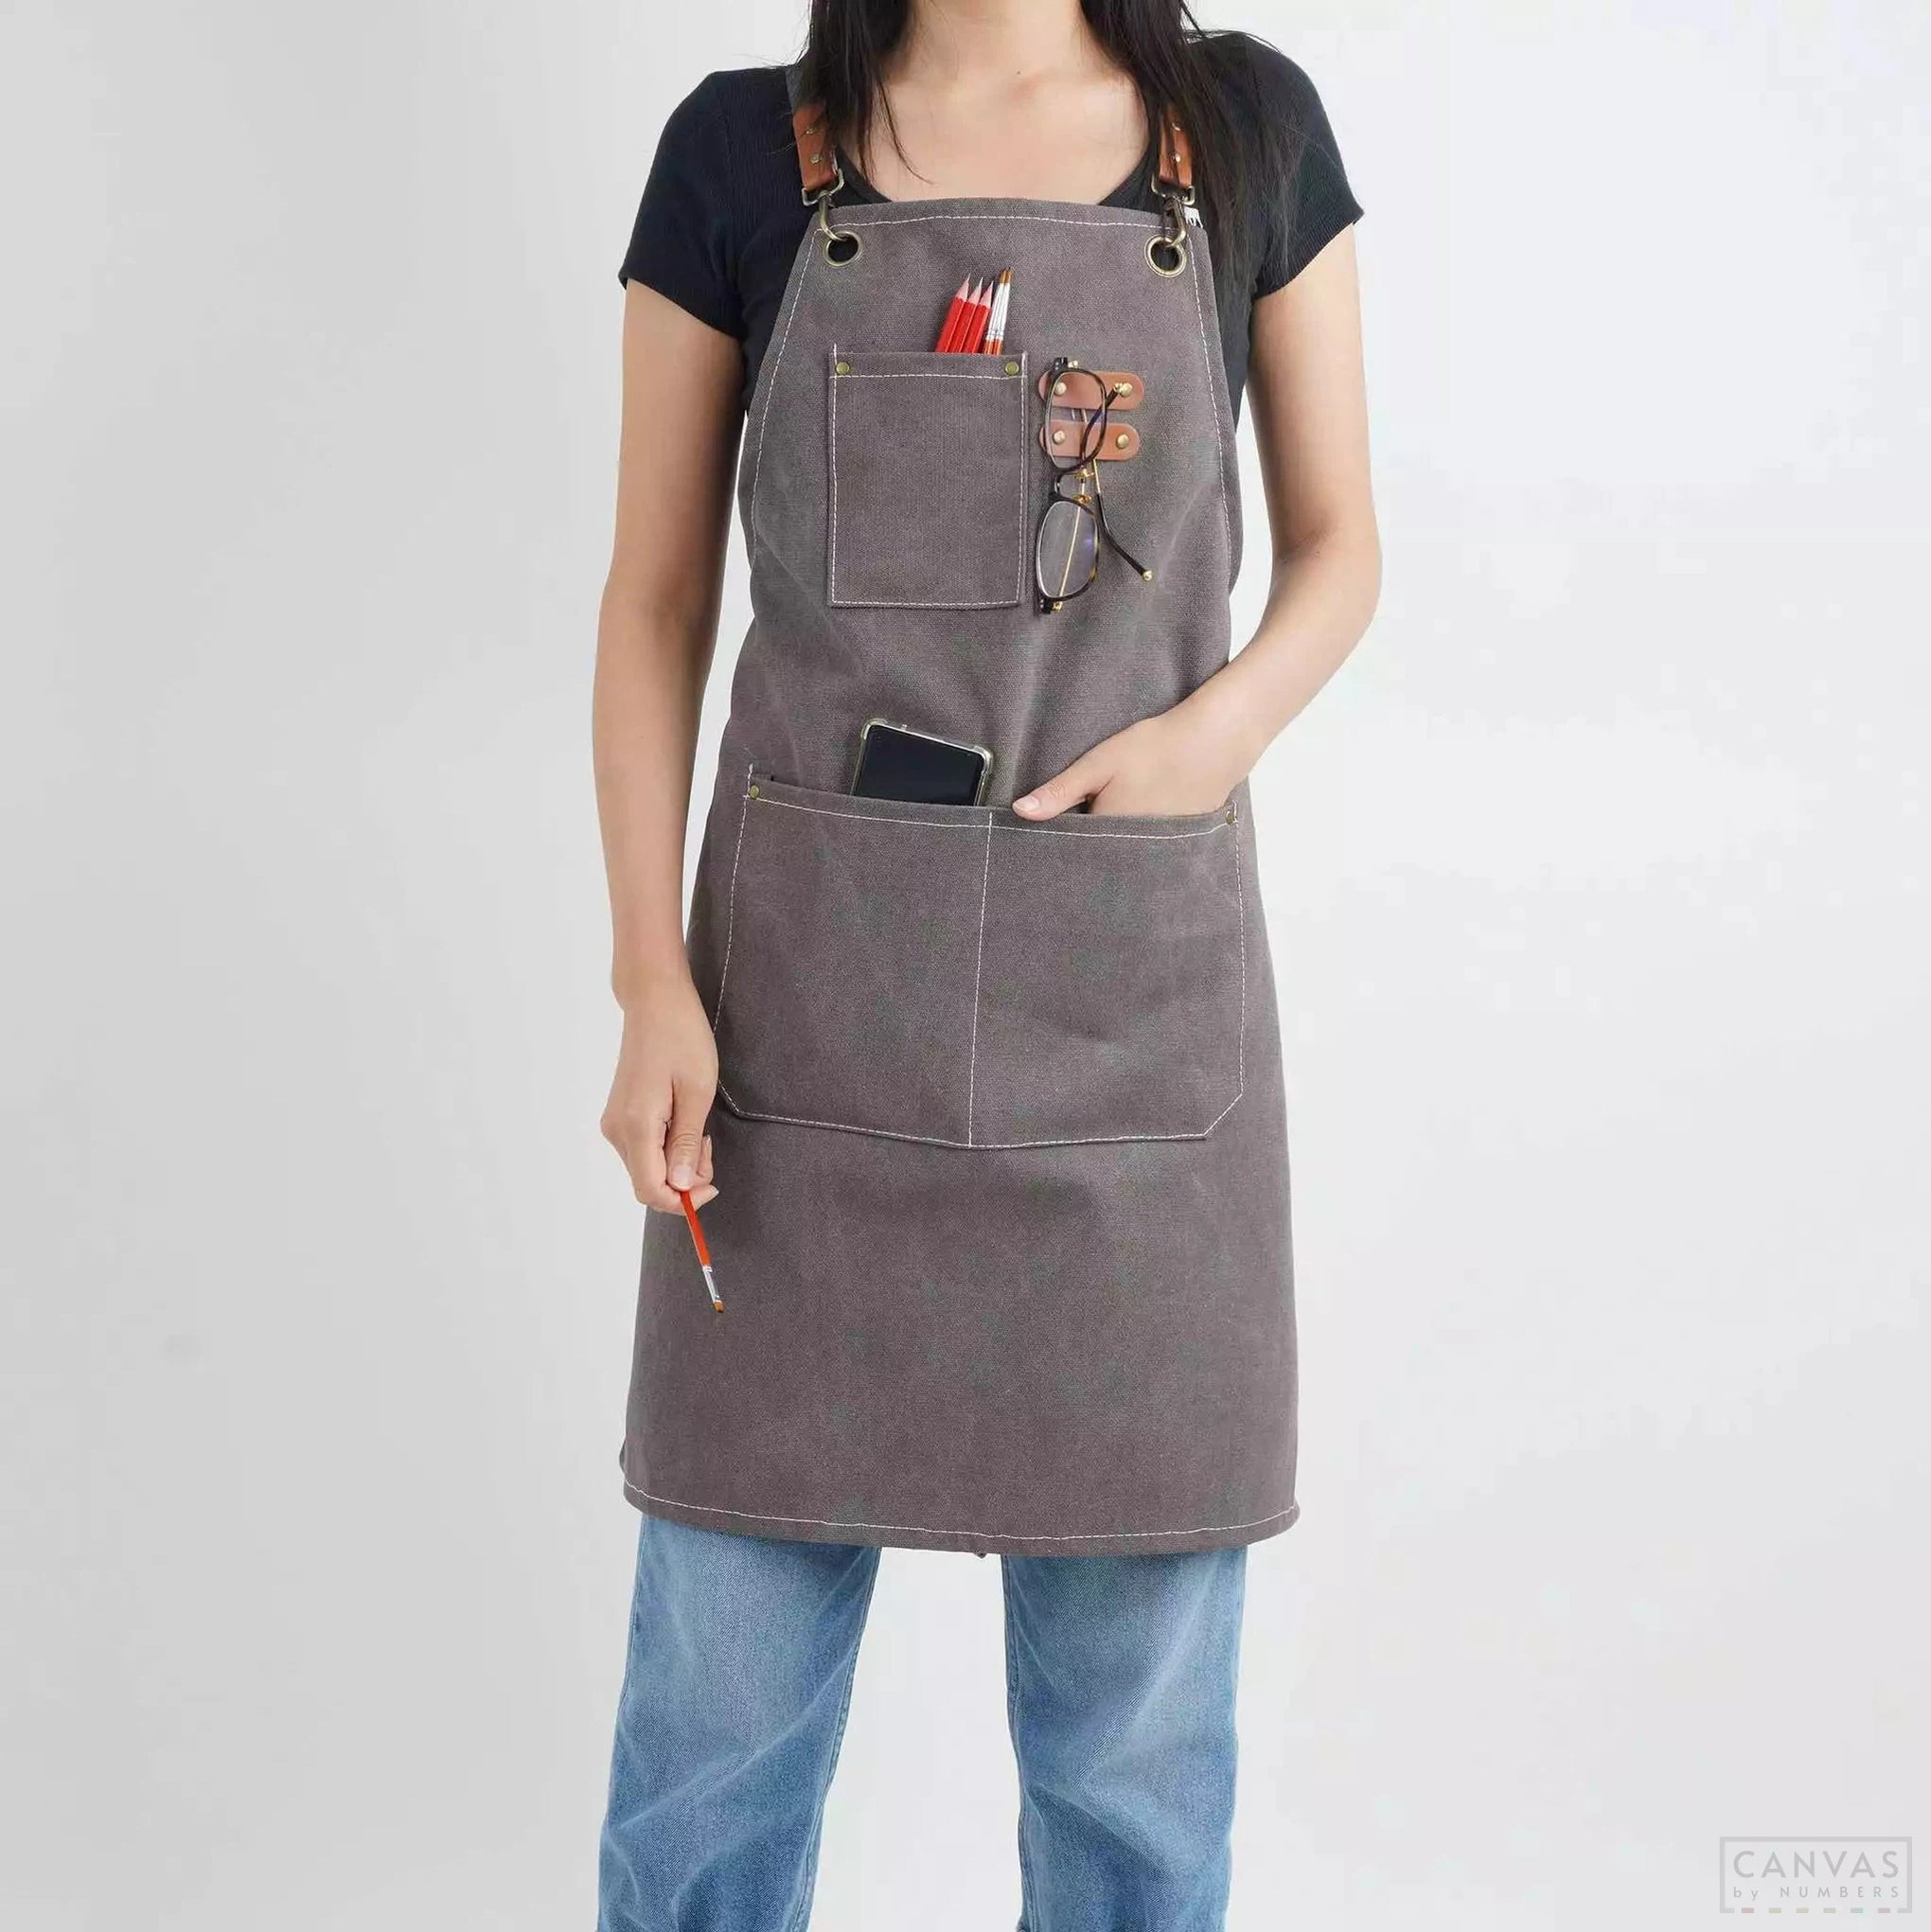 Professional Apron for Artists